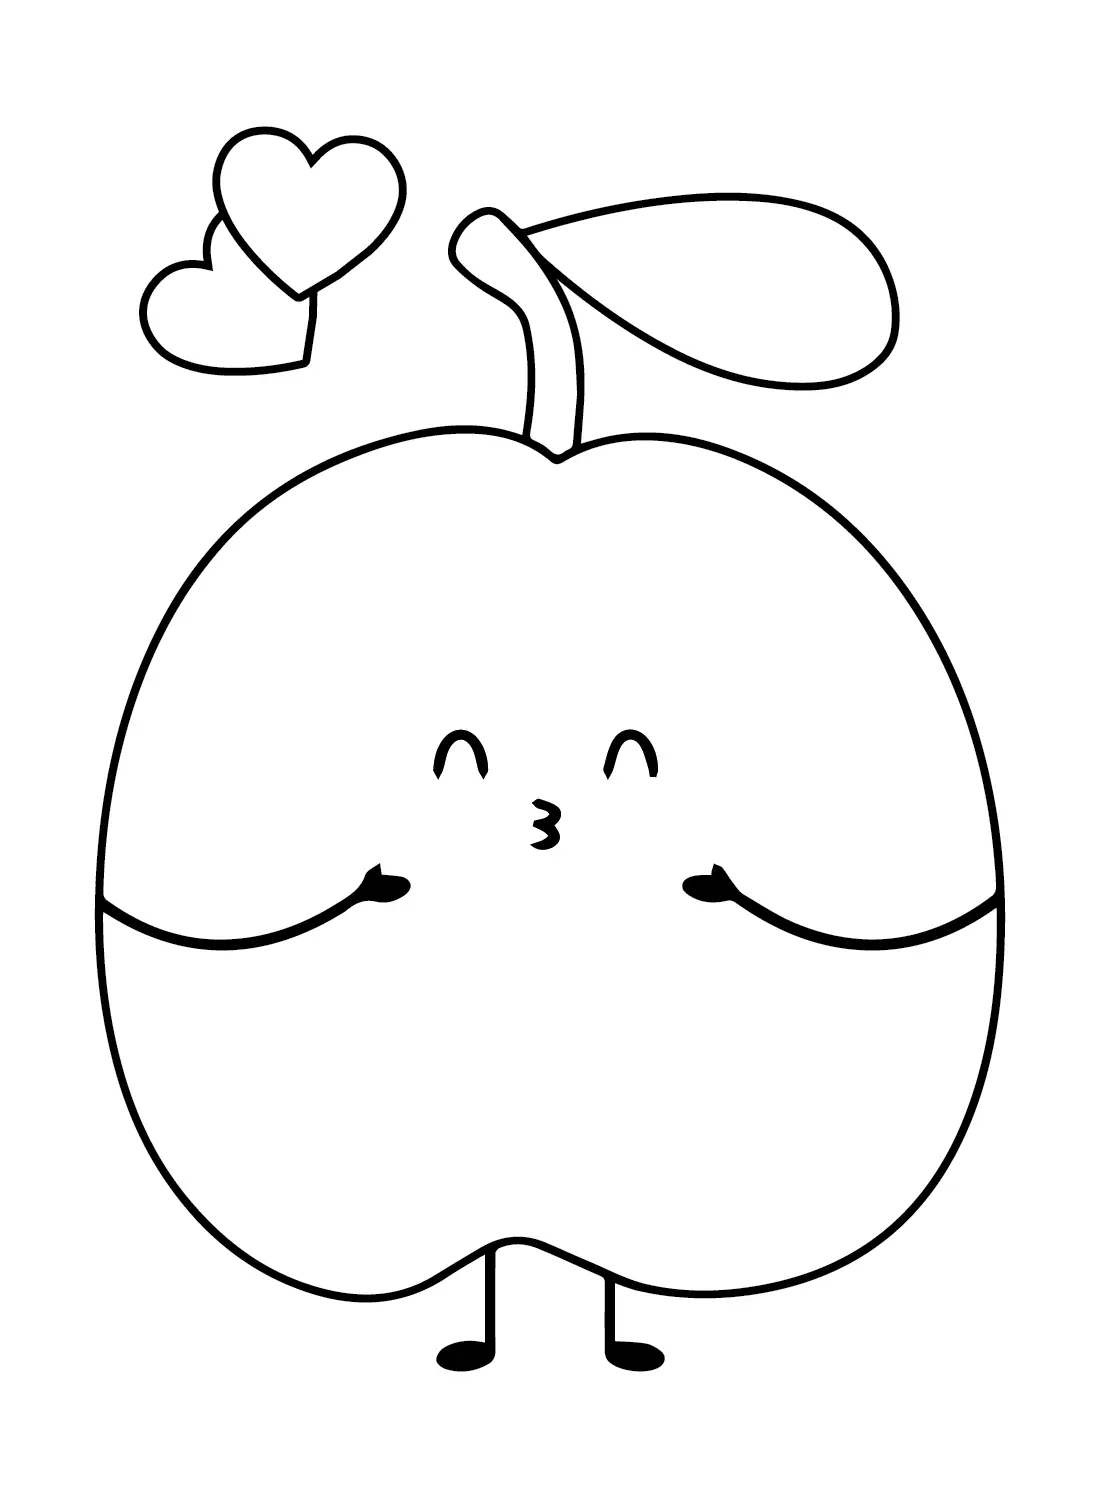 Plums Coloring Pages